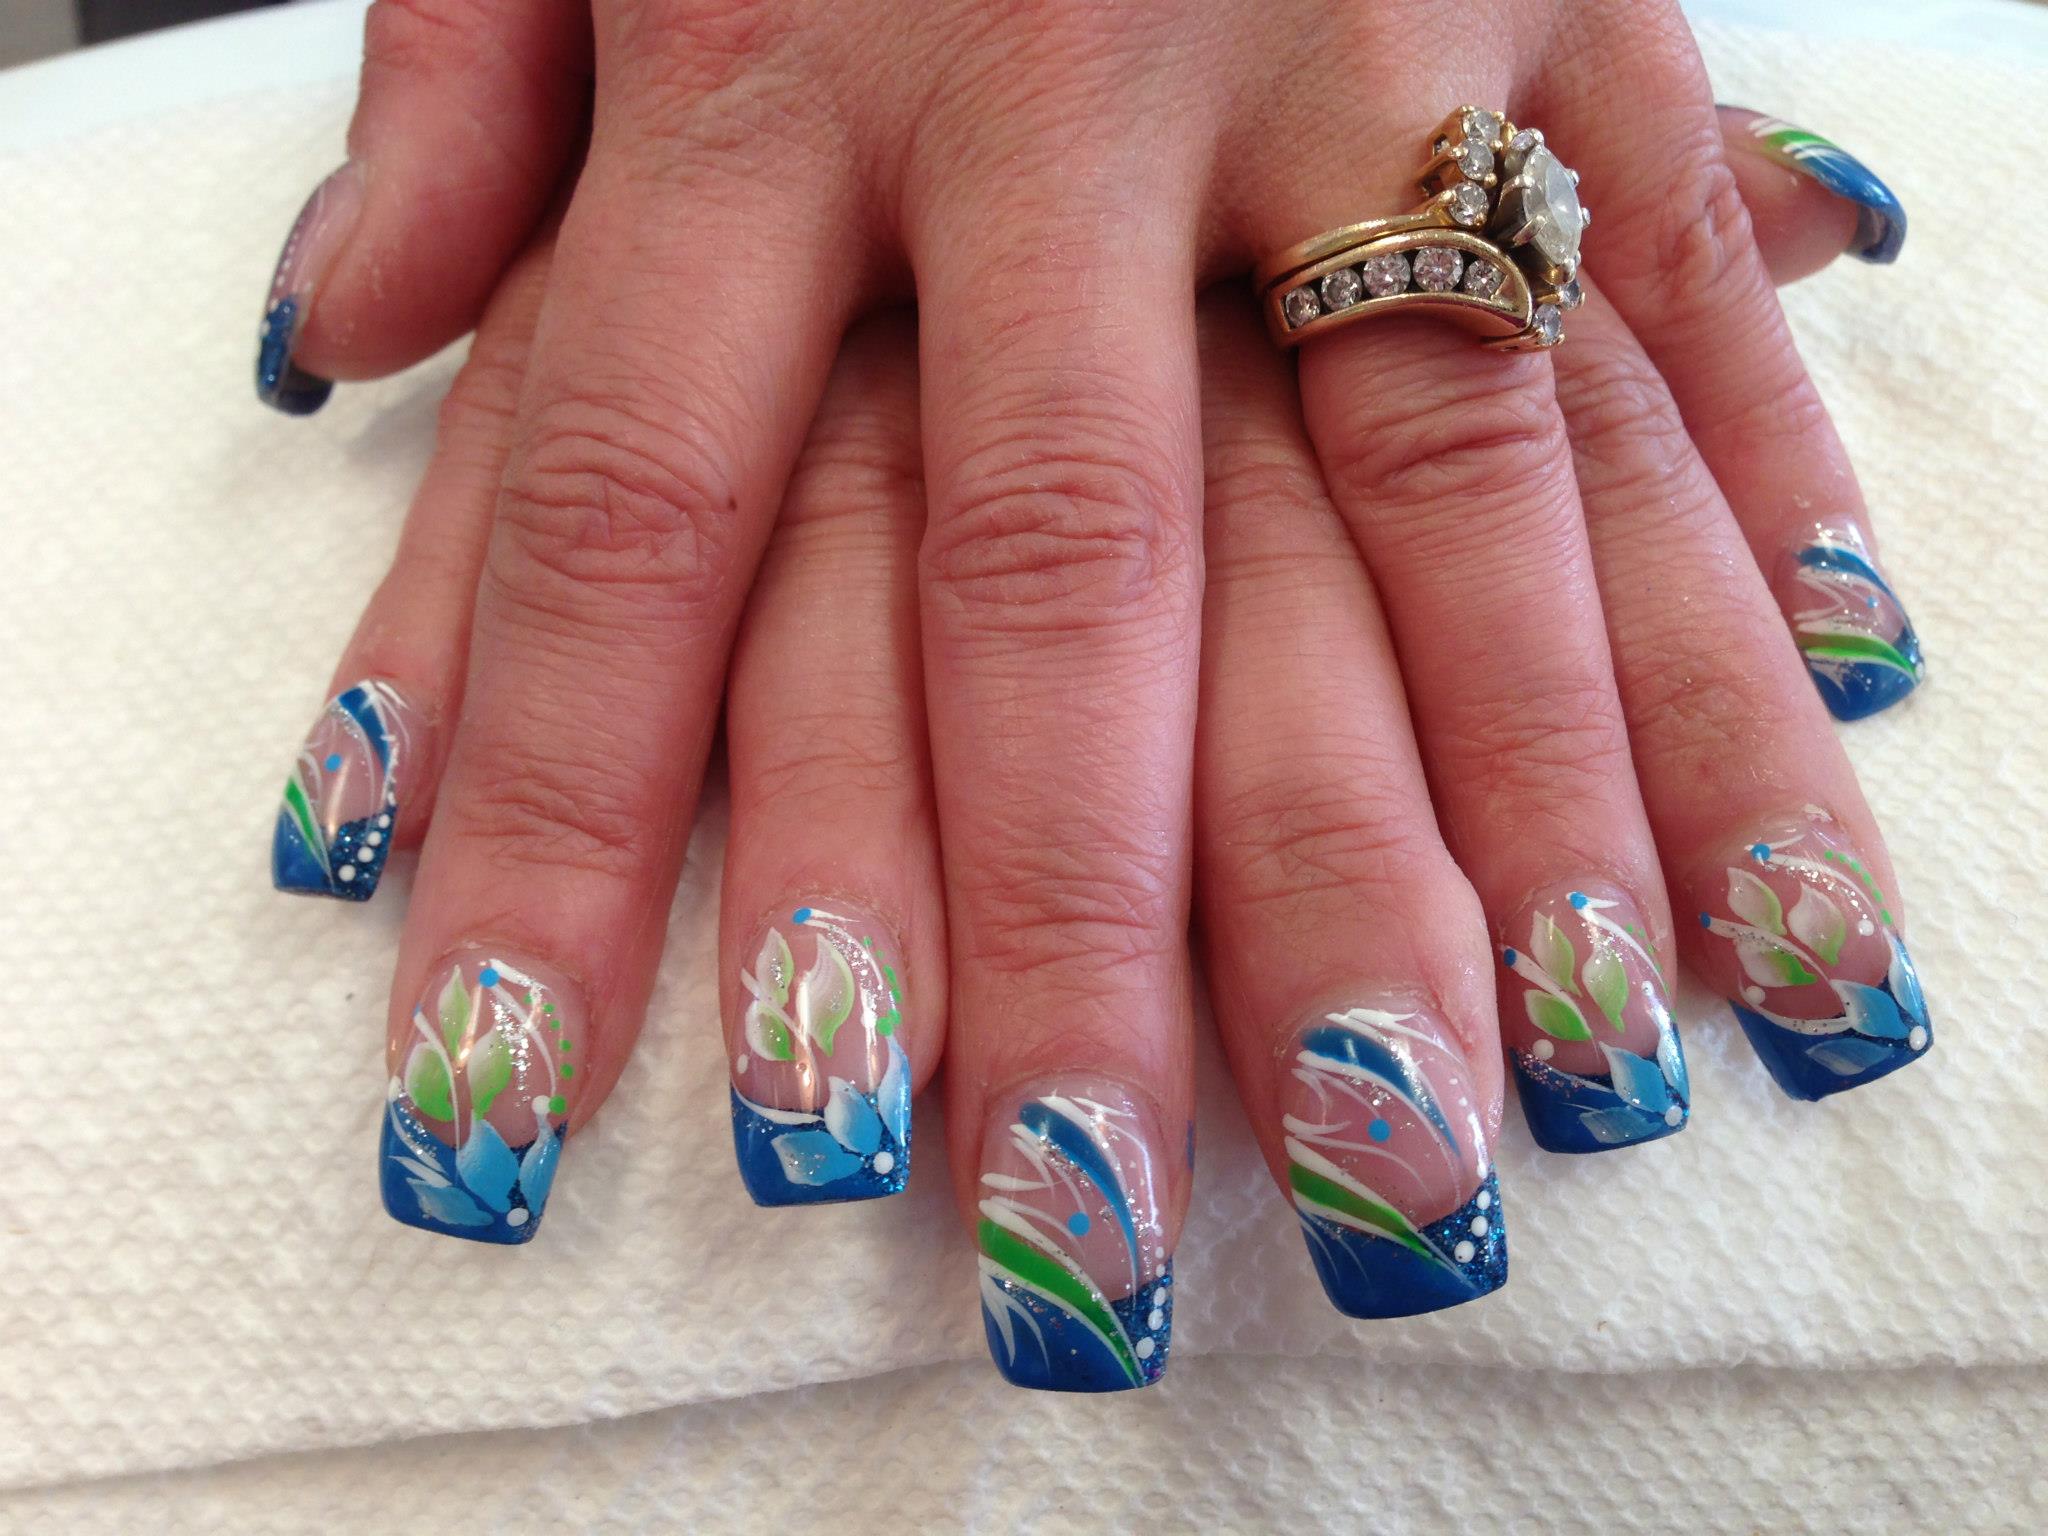 Blue Tip Nail Art with Rhinestones - wide 6